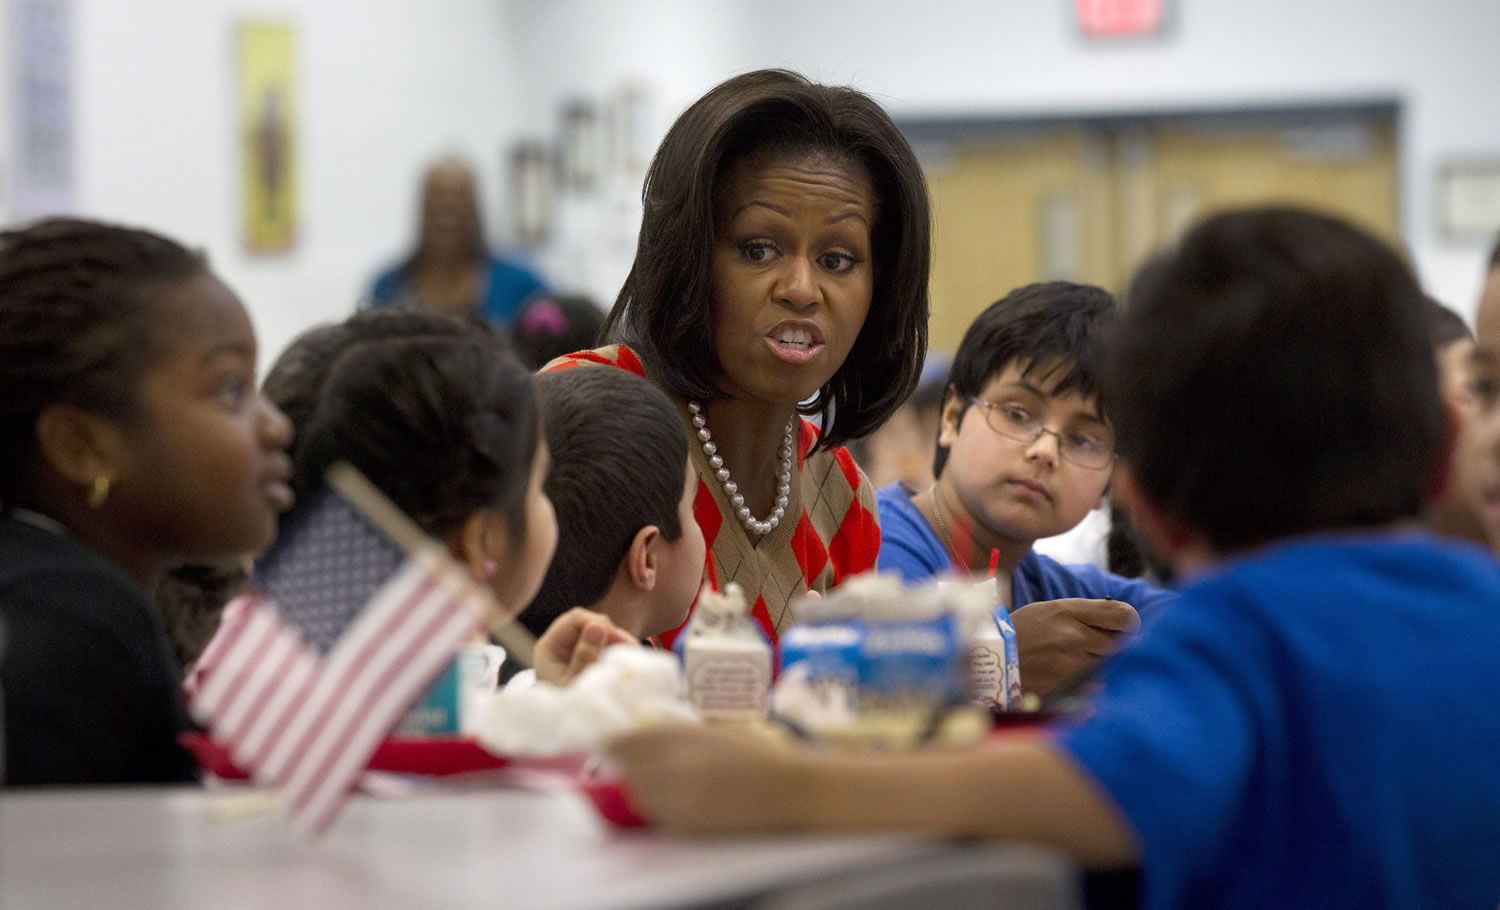 First lady Michelle Obama has lunch with school children at Parklawn elementary school in Alexandria, Va. A bipartisan Senate bill released Monday would revise healthier meal standards put into place over the last few years to give schools more flexibility in what they serve the nation&#039;s schoolchildren, easing requirements on whole grains and delaying an upcoming deadline to cut sodium levels on the lunch line.